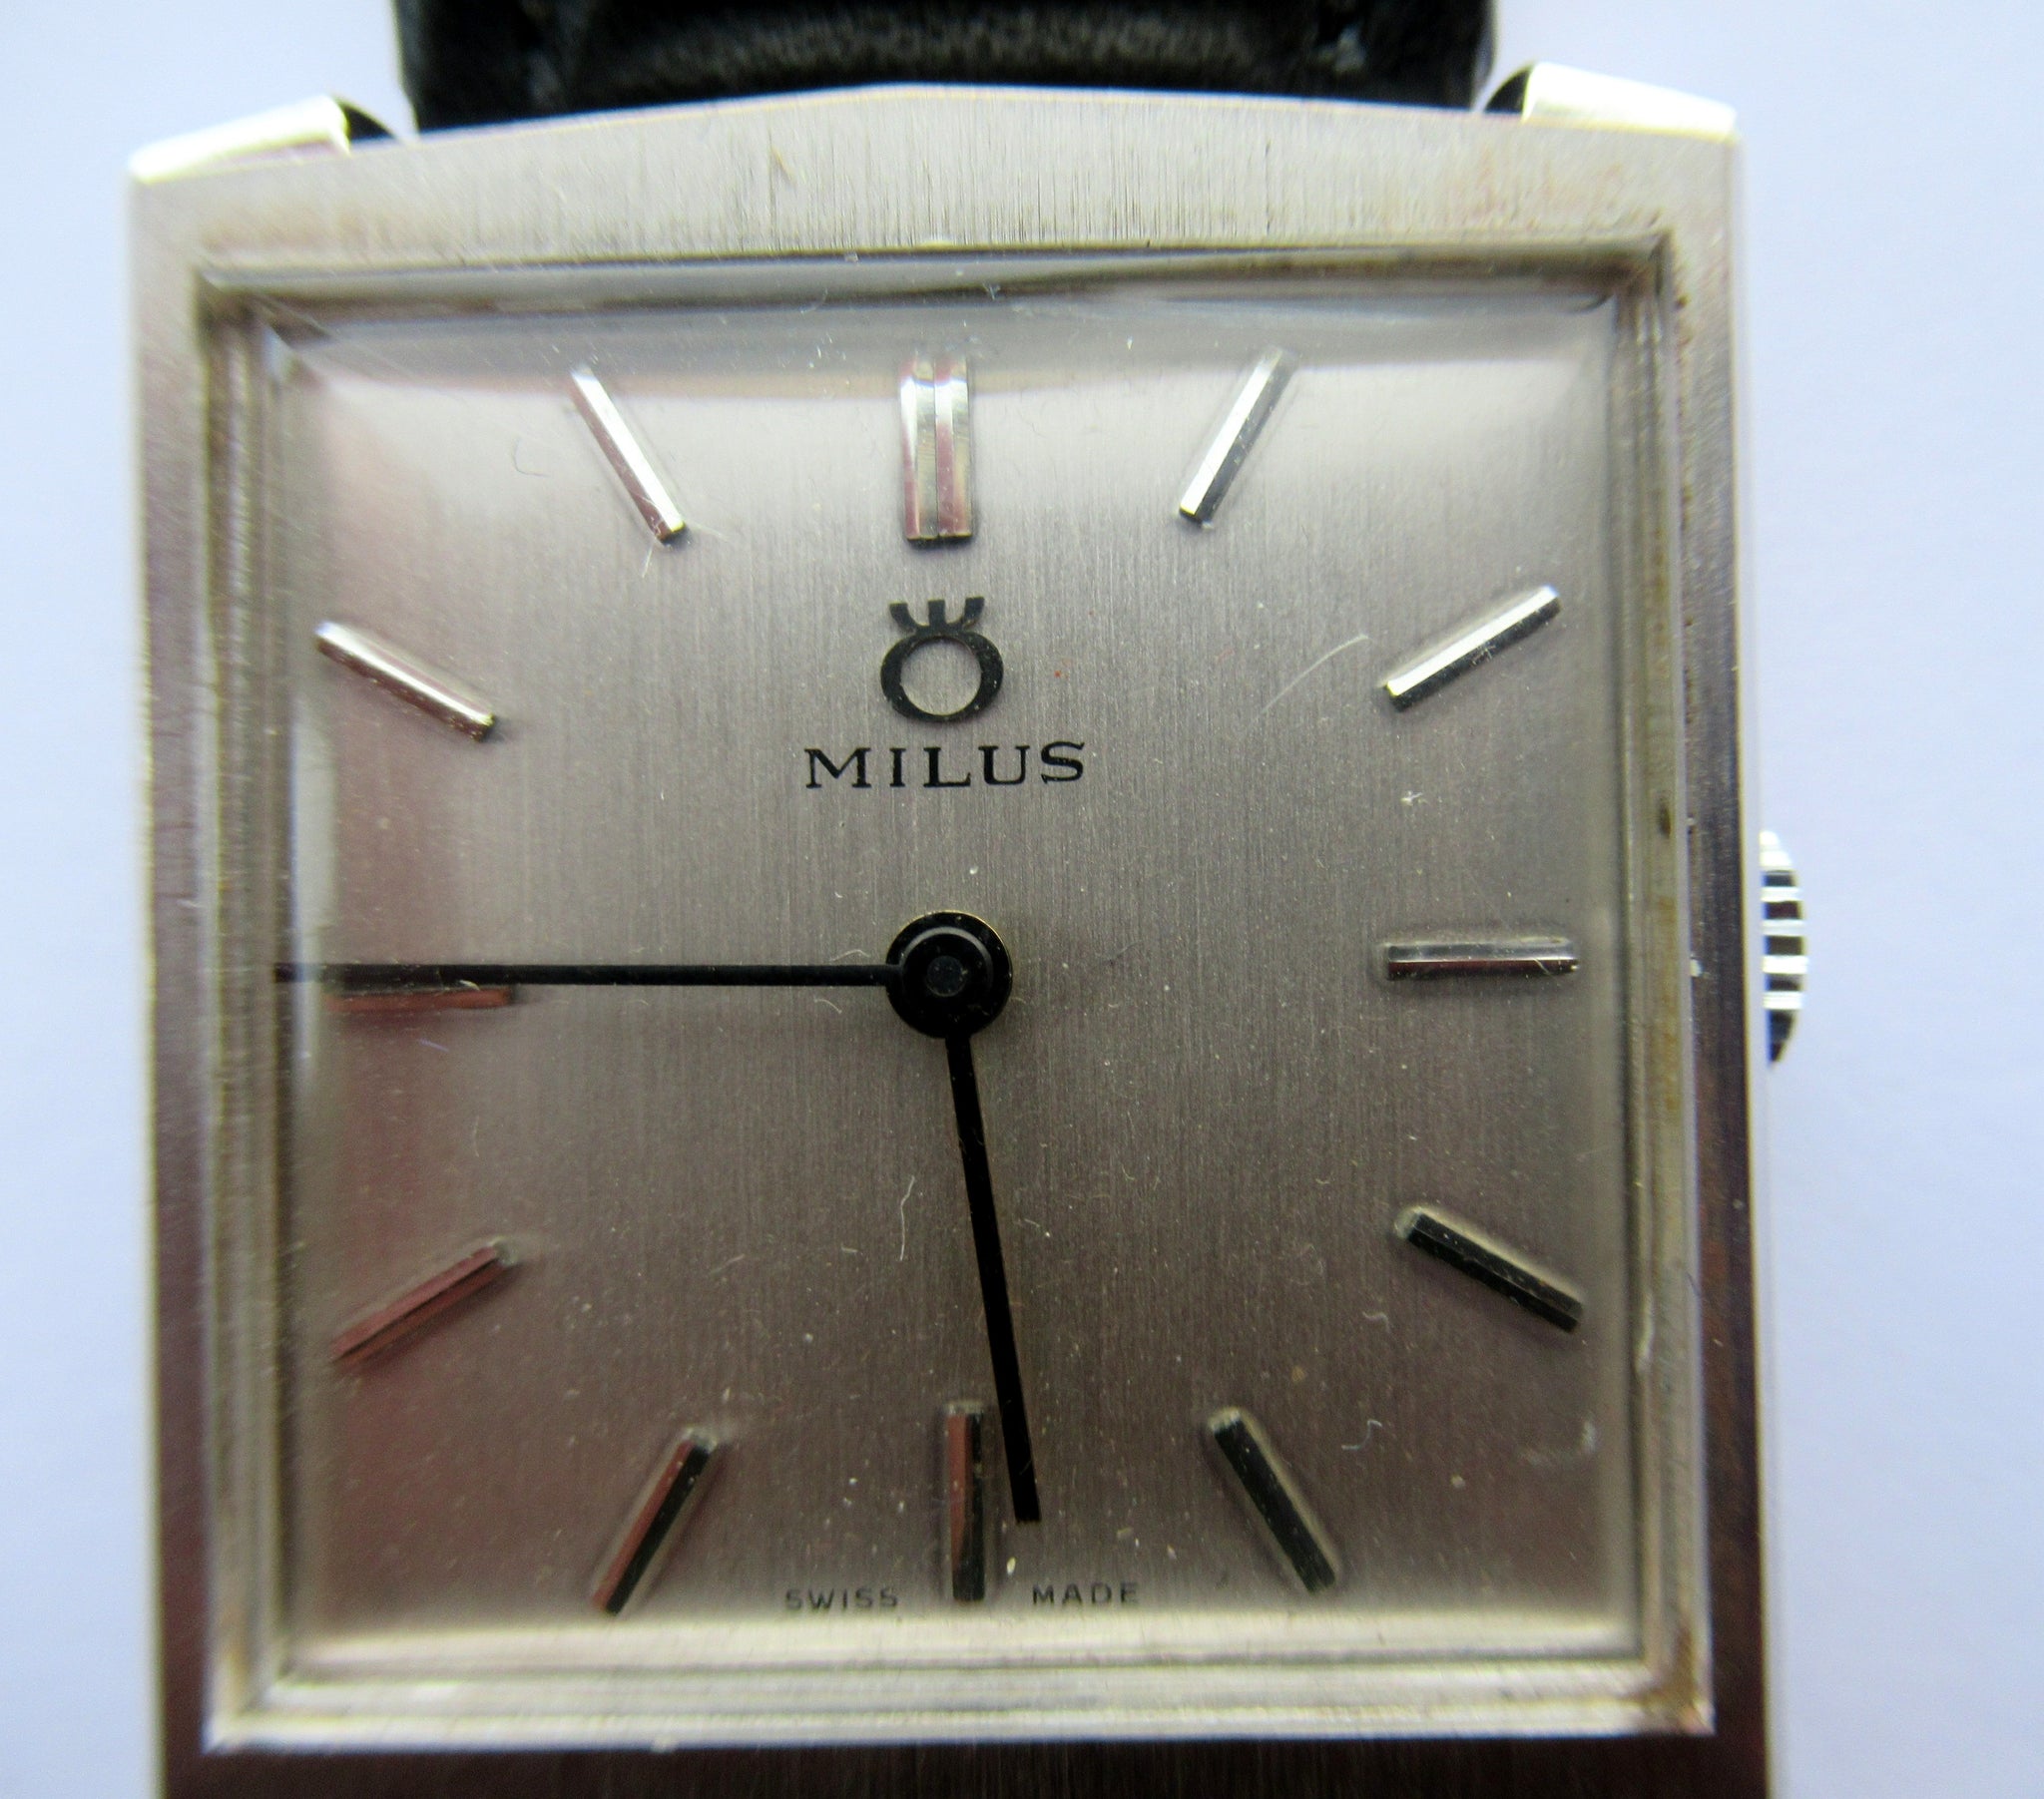 Vintage 1960s Square Faced Manual Wind MILUS Wristwatch with Black Lea ...